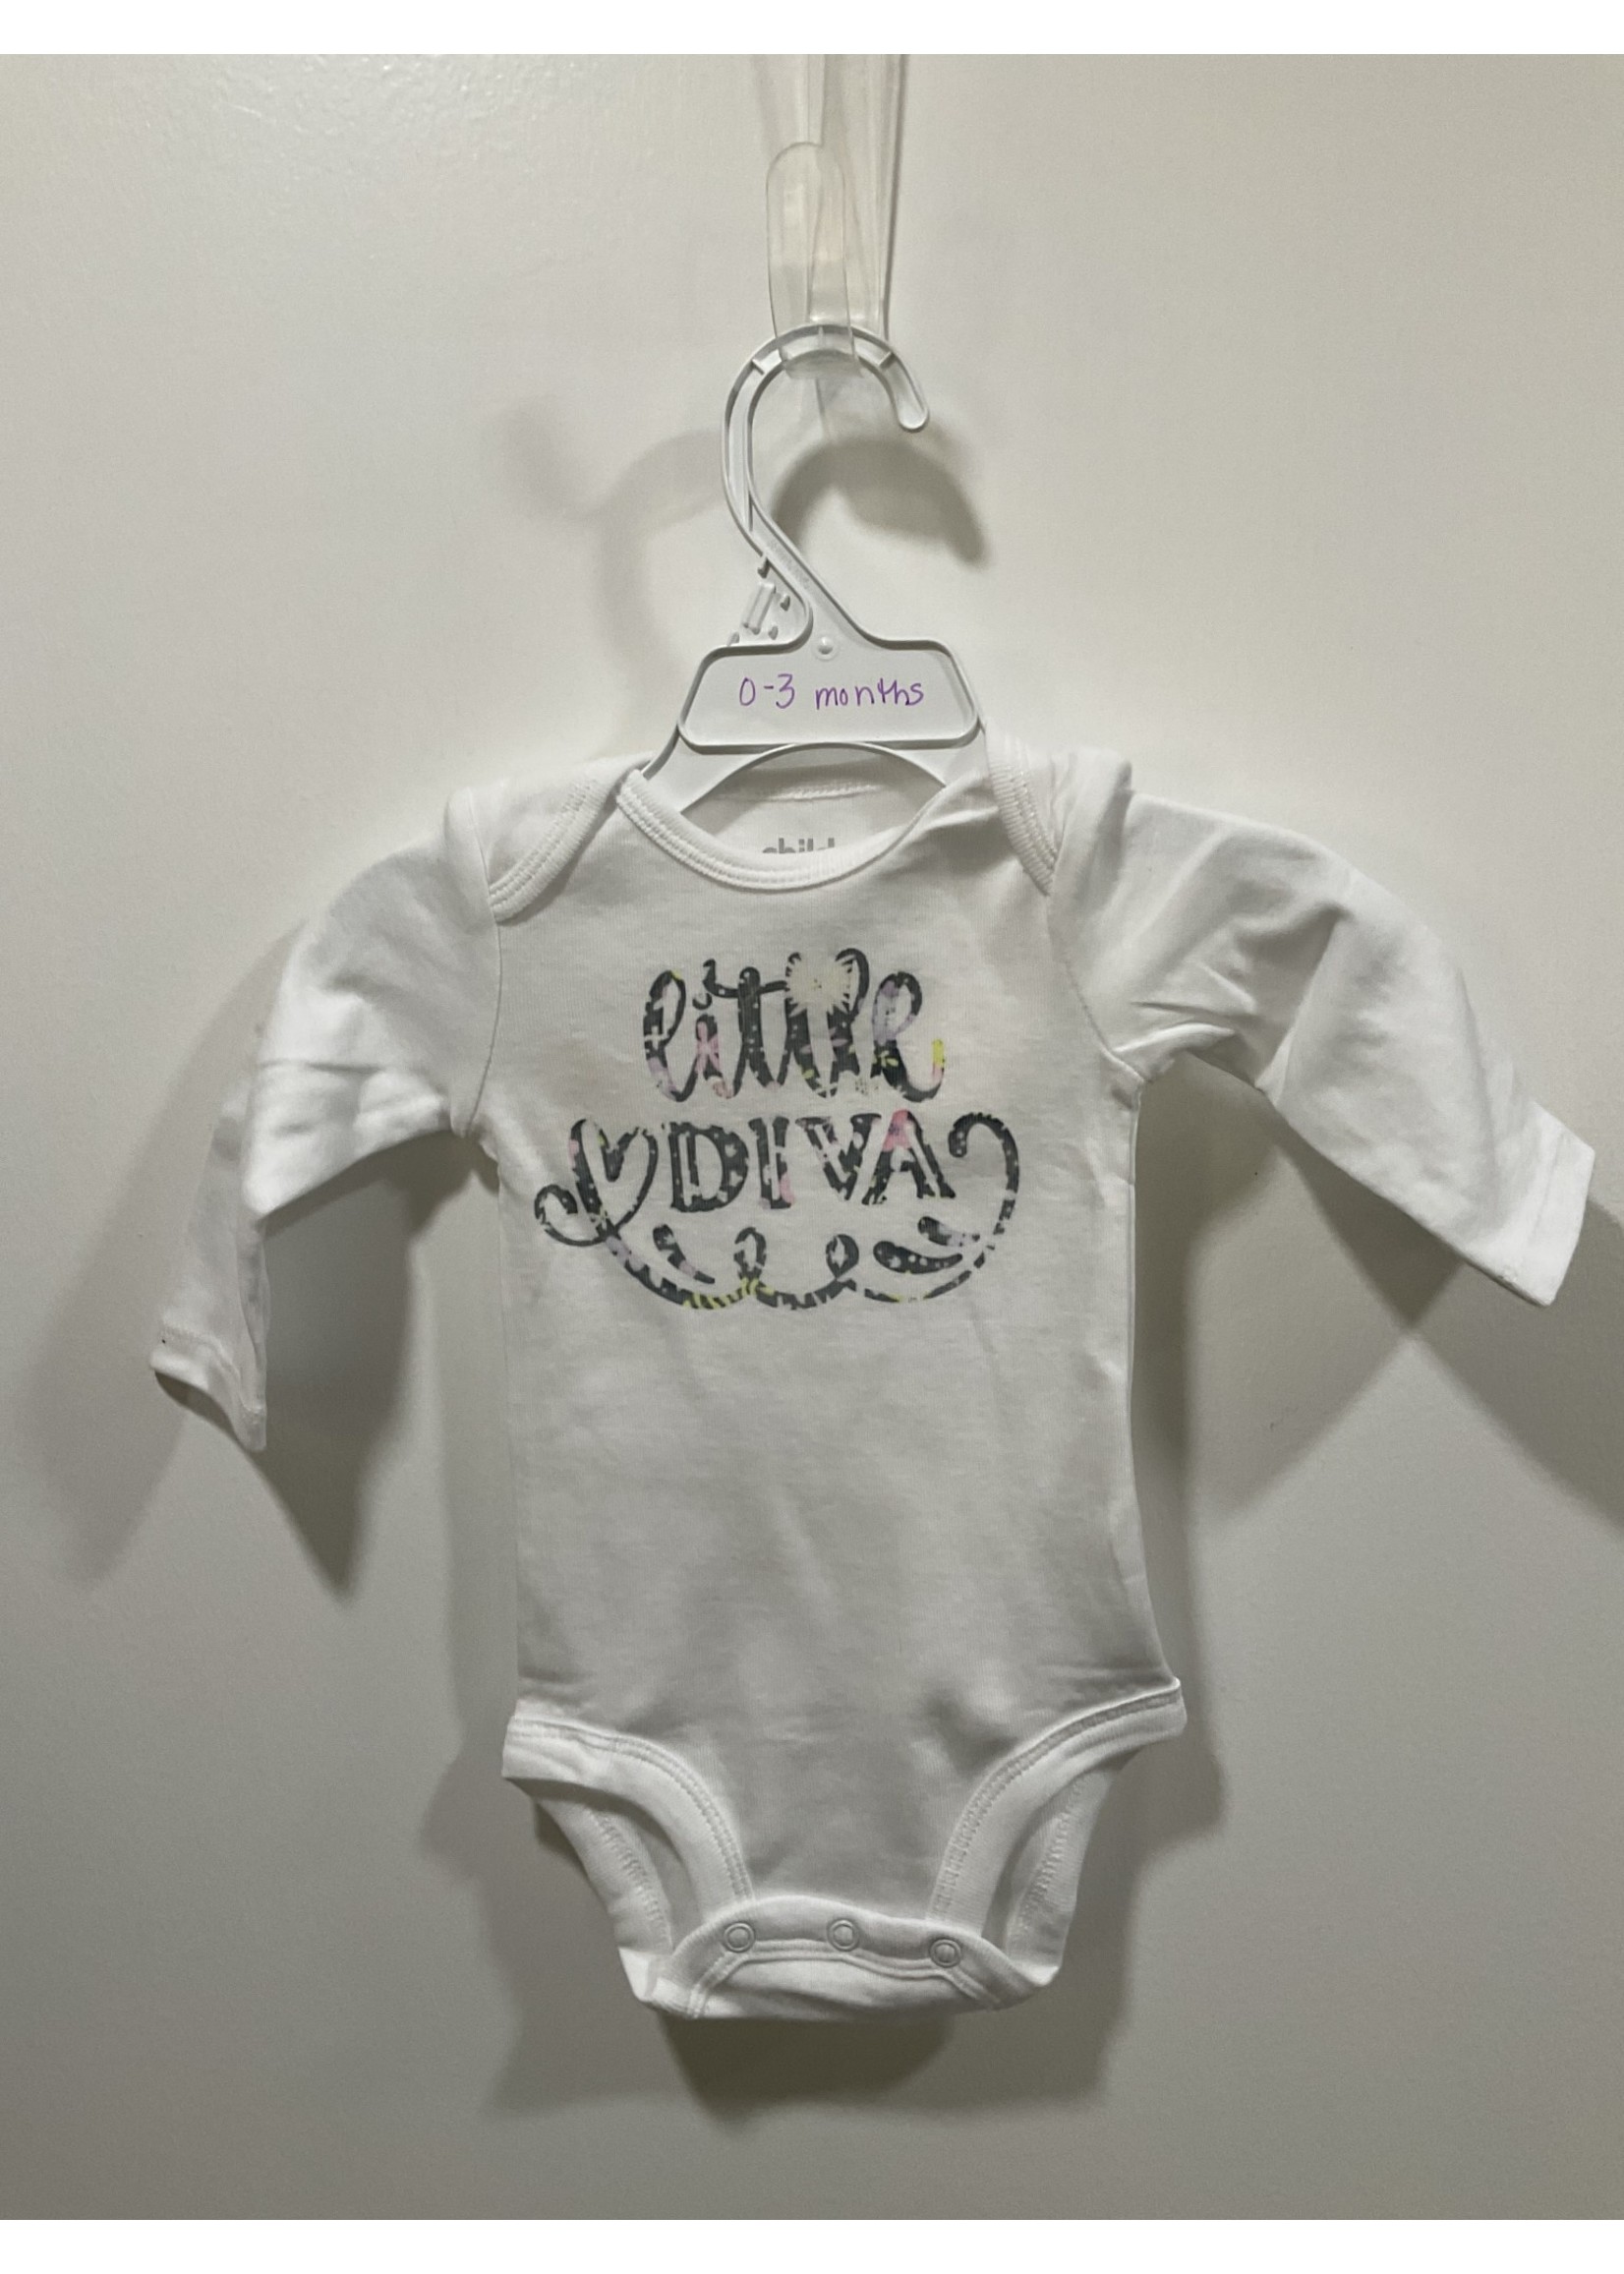 My New Favorite Thing Onsie White w/Colorful Flower Print "Little Diva" long sleeve 3 month